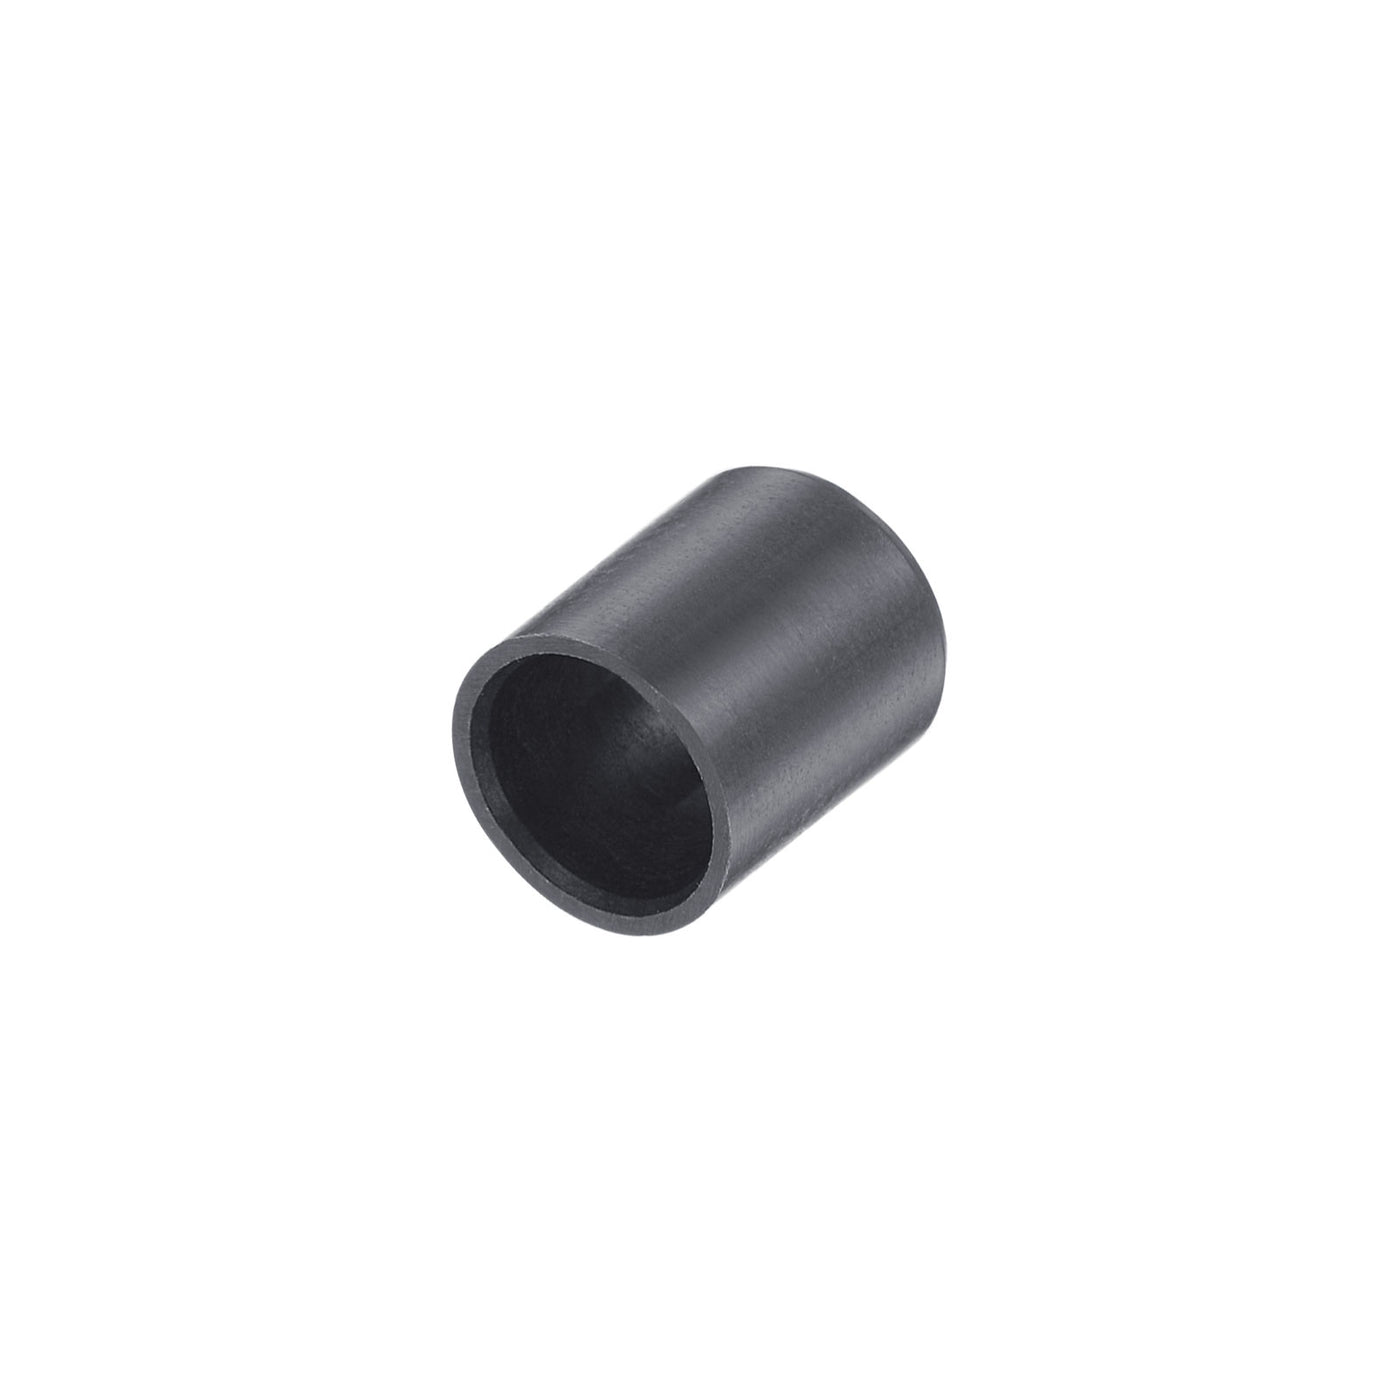 uxcell Uxcell Sleeve Bearings 8mmx10mmx12mm POM Wrapped Oilless Bushings Black